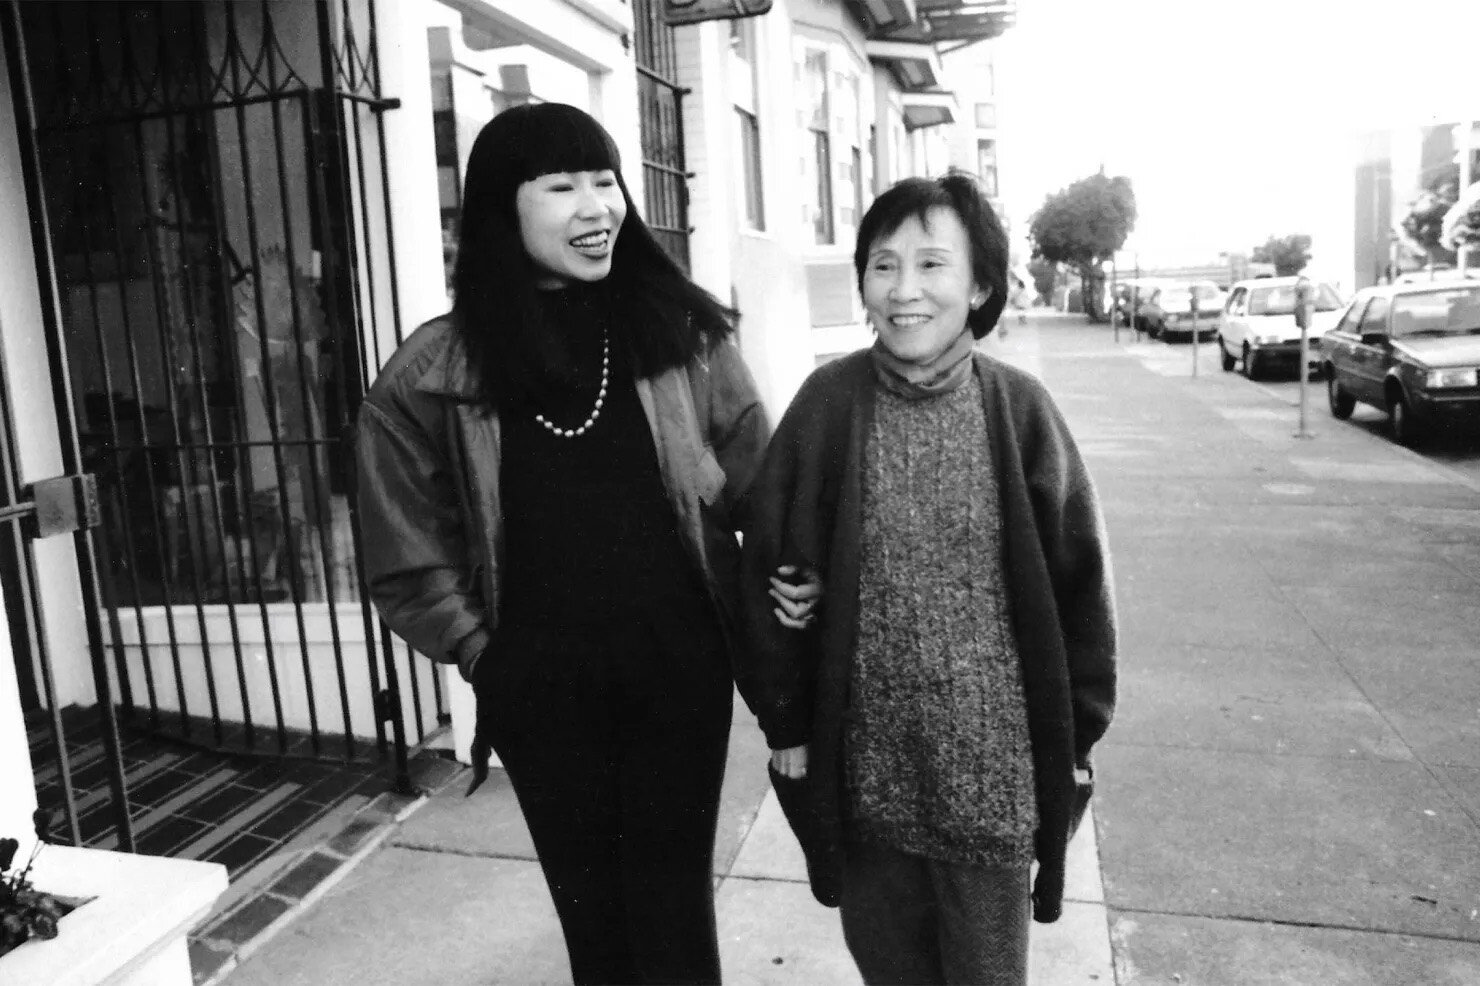 Amy Tan holds Daisy Tan's right elbow with her left hand. They are walking down the a sidewalk and smiling.